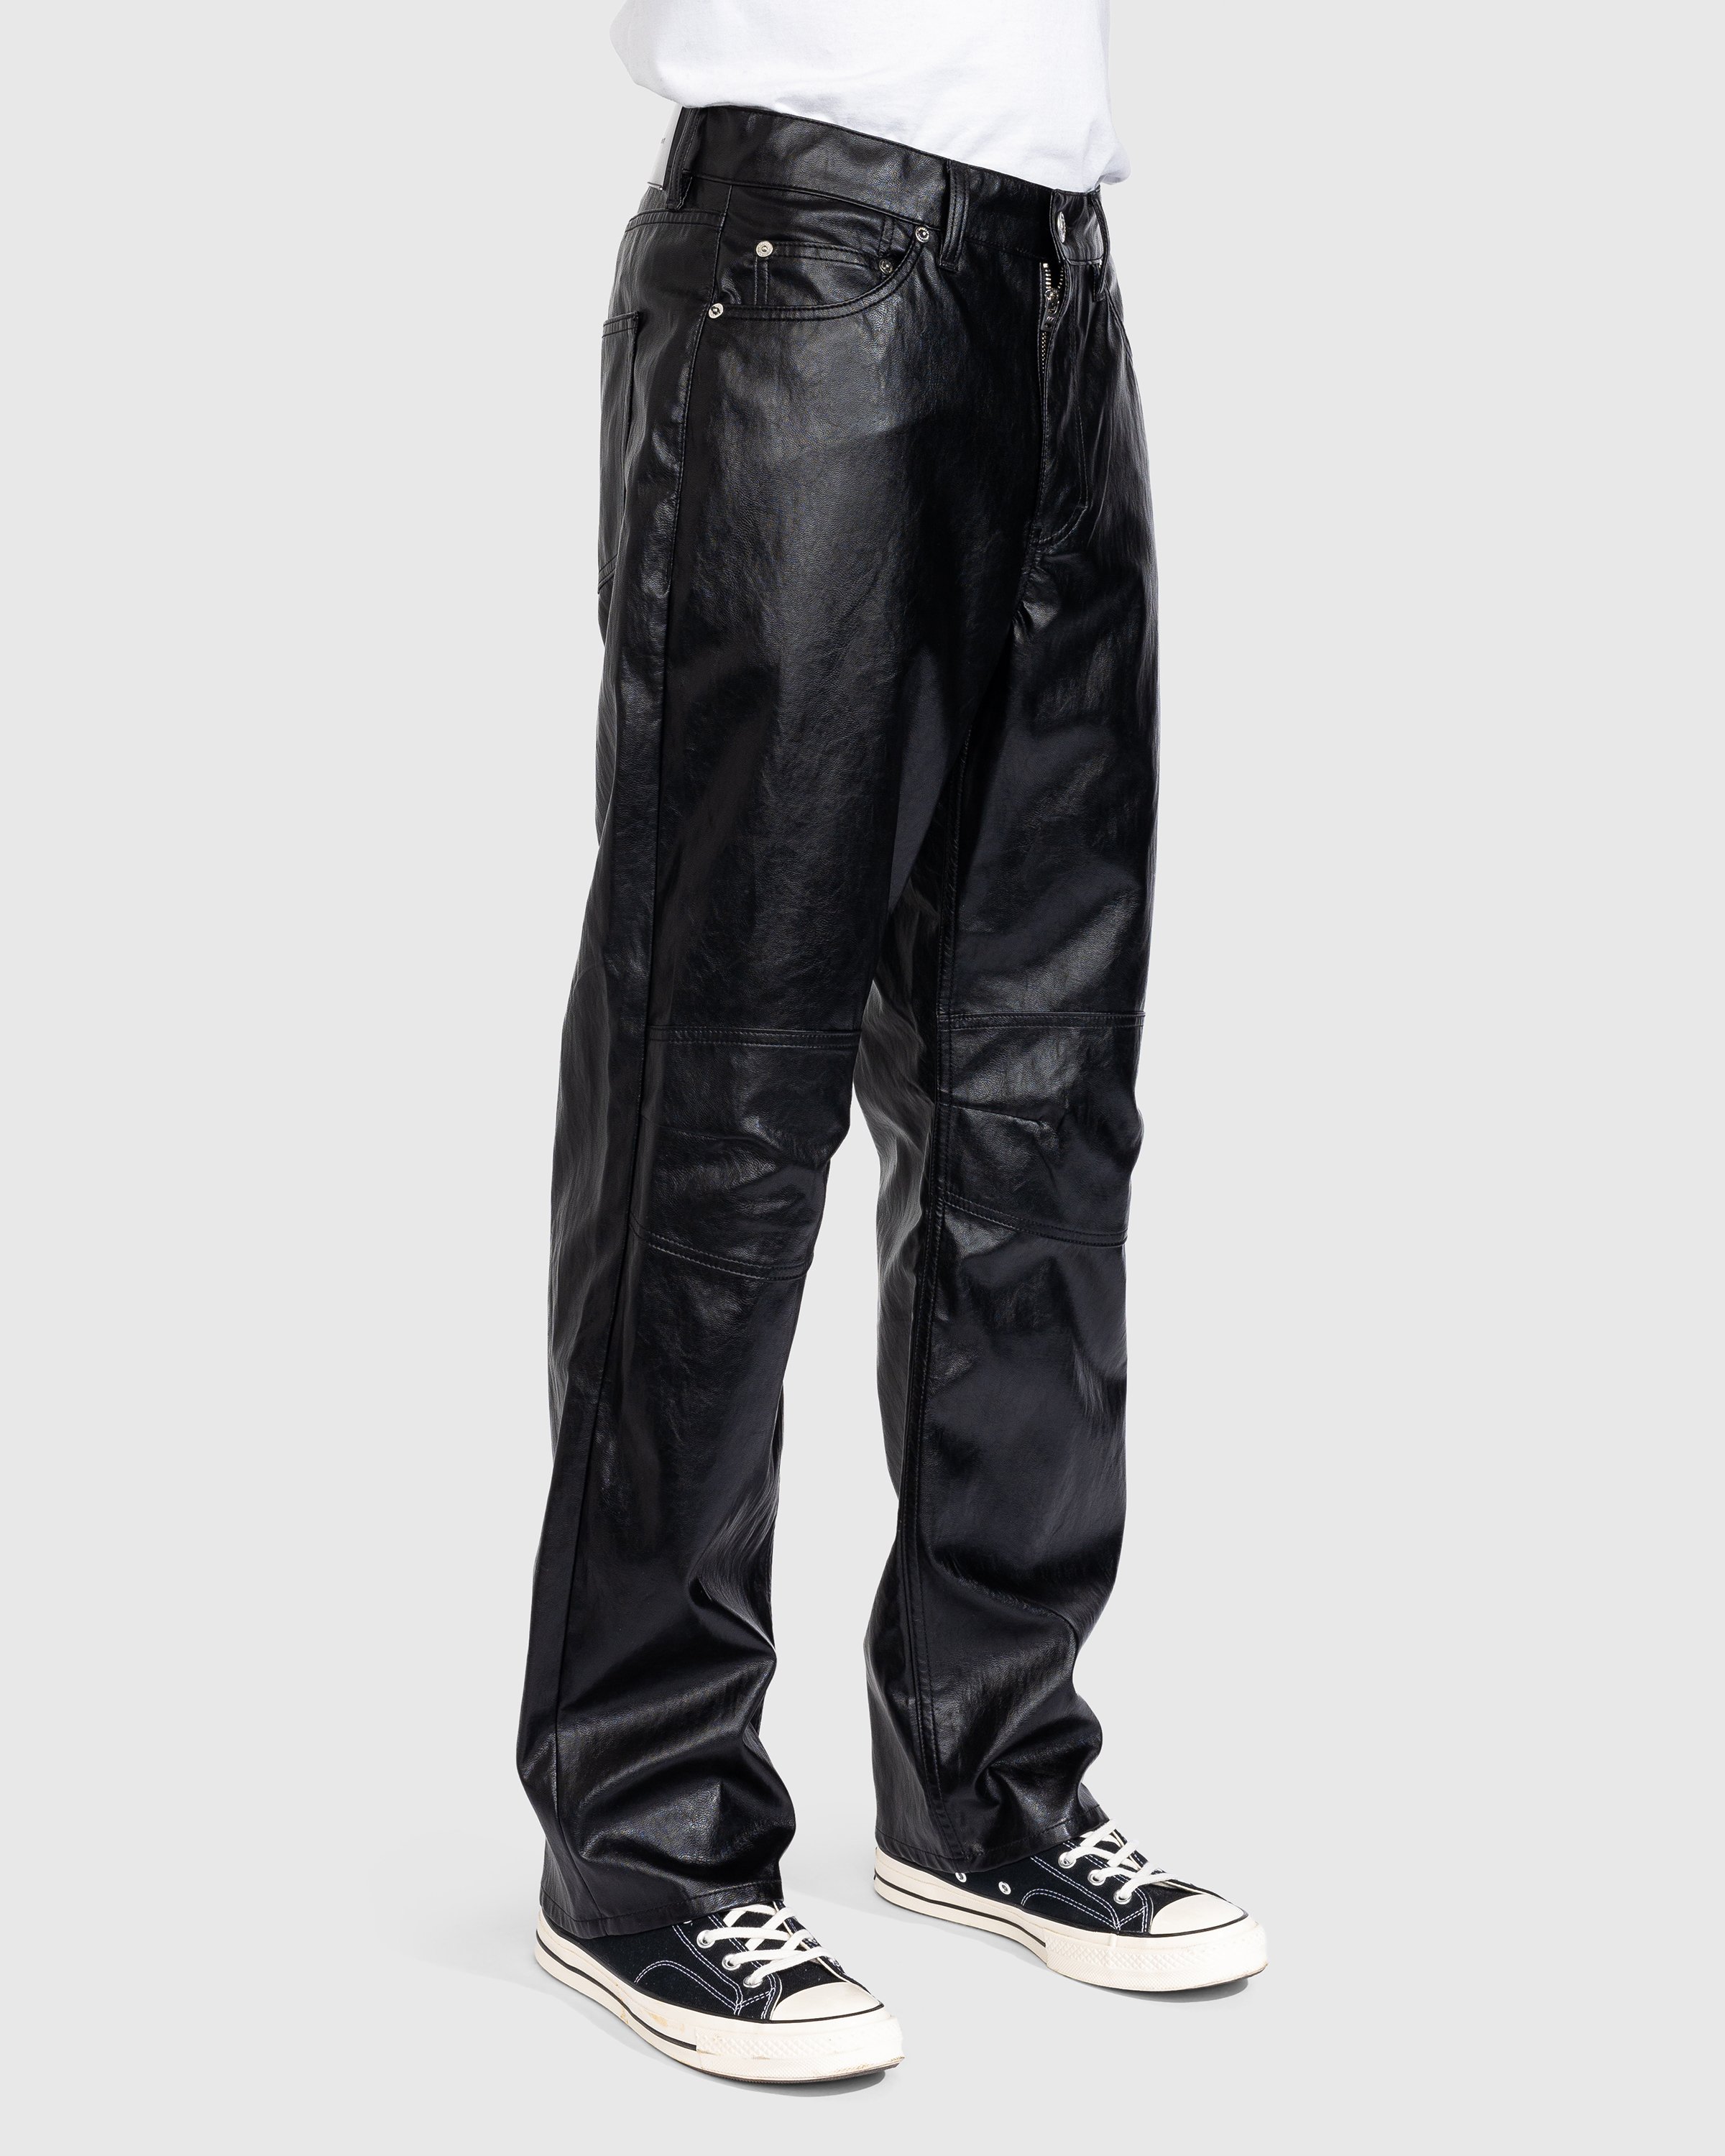 Our Legacy - Formal Moto Cut Trouser Black - Clothing - Black - Image 3